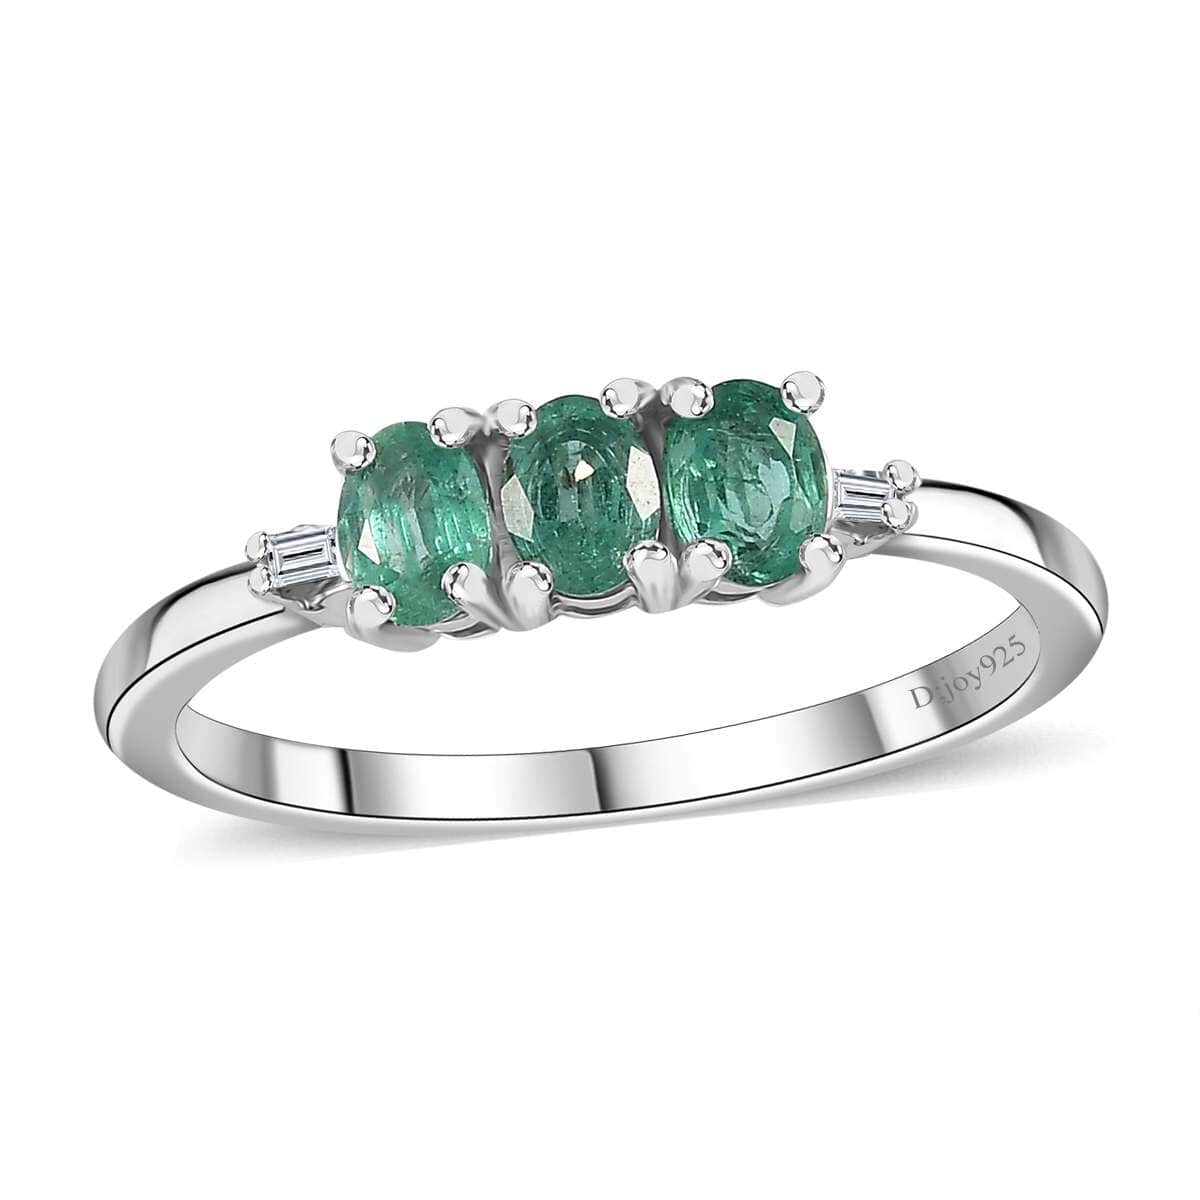 AAA Kagem Zambian Emerald and Diamond Accent Trilogy Ring in Platinum Over Sterling Silver 0.50 ctw (Del. in 8-10 Days) image number 0